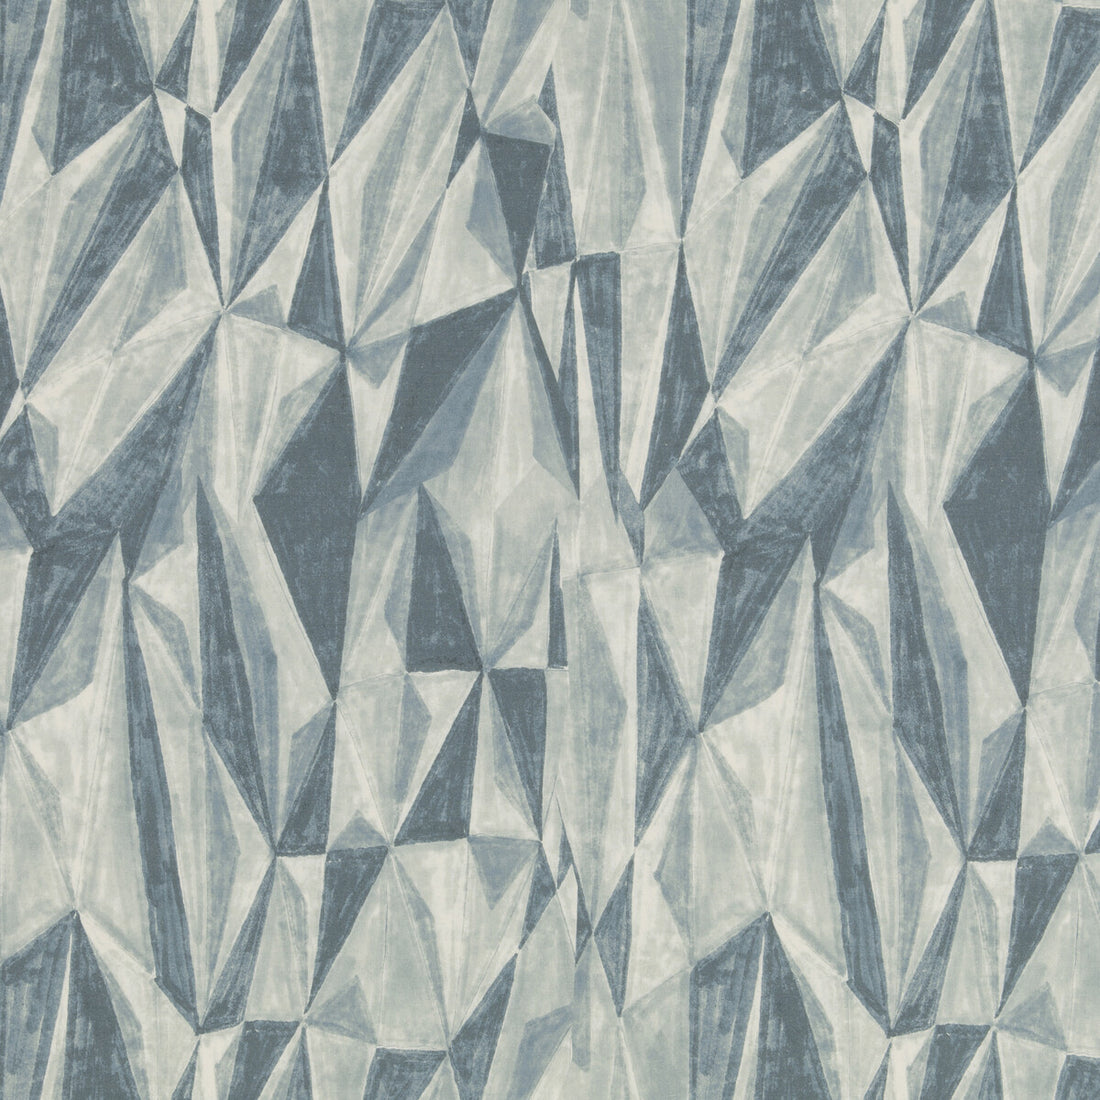 Covet fabric in denim color - pattern GWF-3722.511.0 - by Lee Jofa Modern in the Kelly Wearstler IV collection